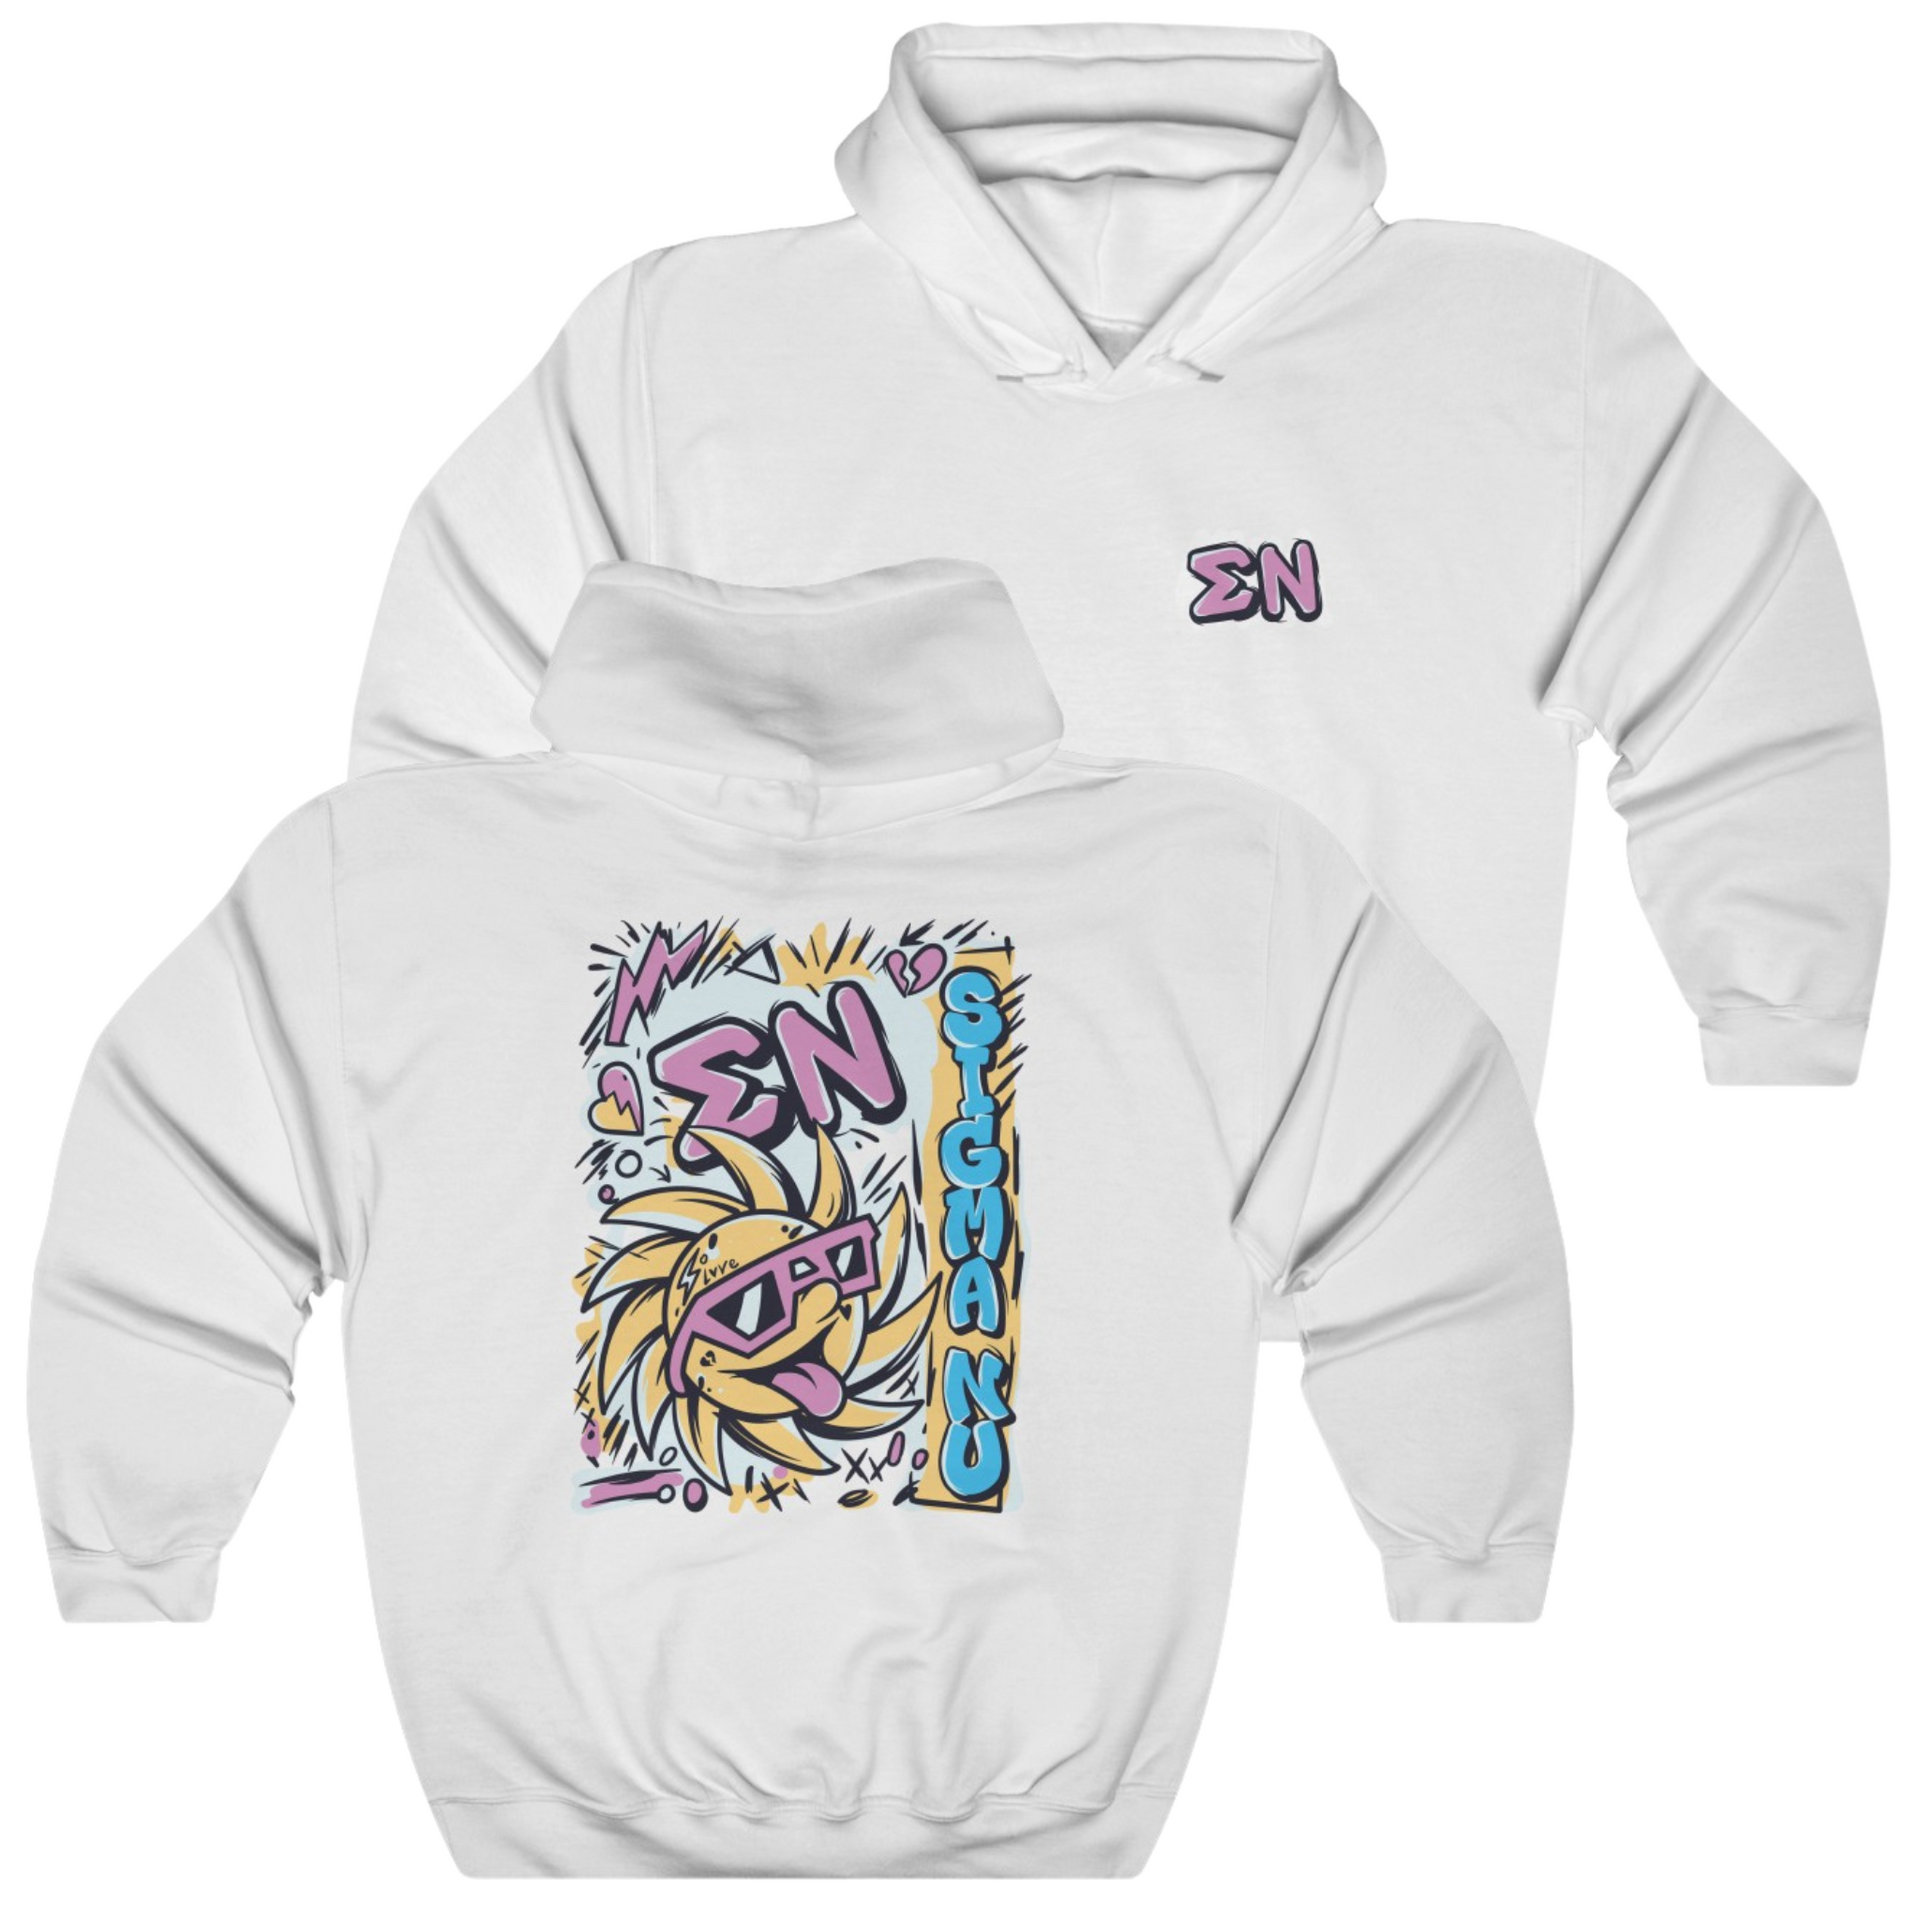 grey Sigma Nu Graphic Hoodie | Fun in the Sun | Sigma Nu Clothing, Apparel and Merchandise